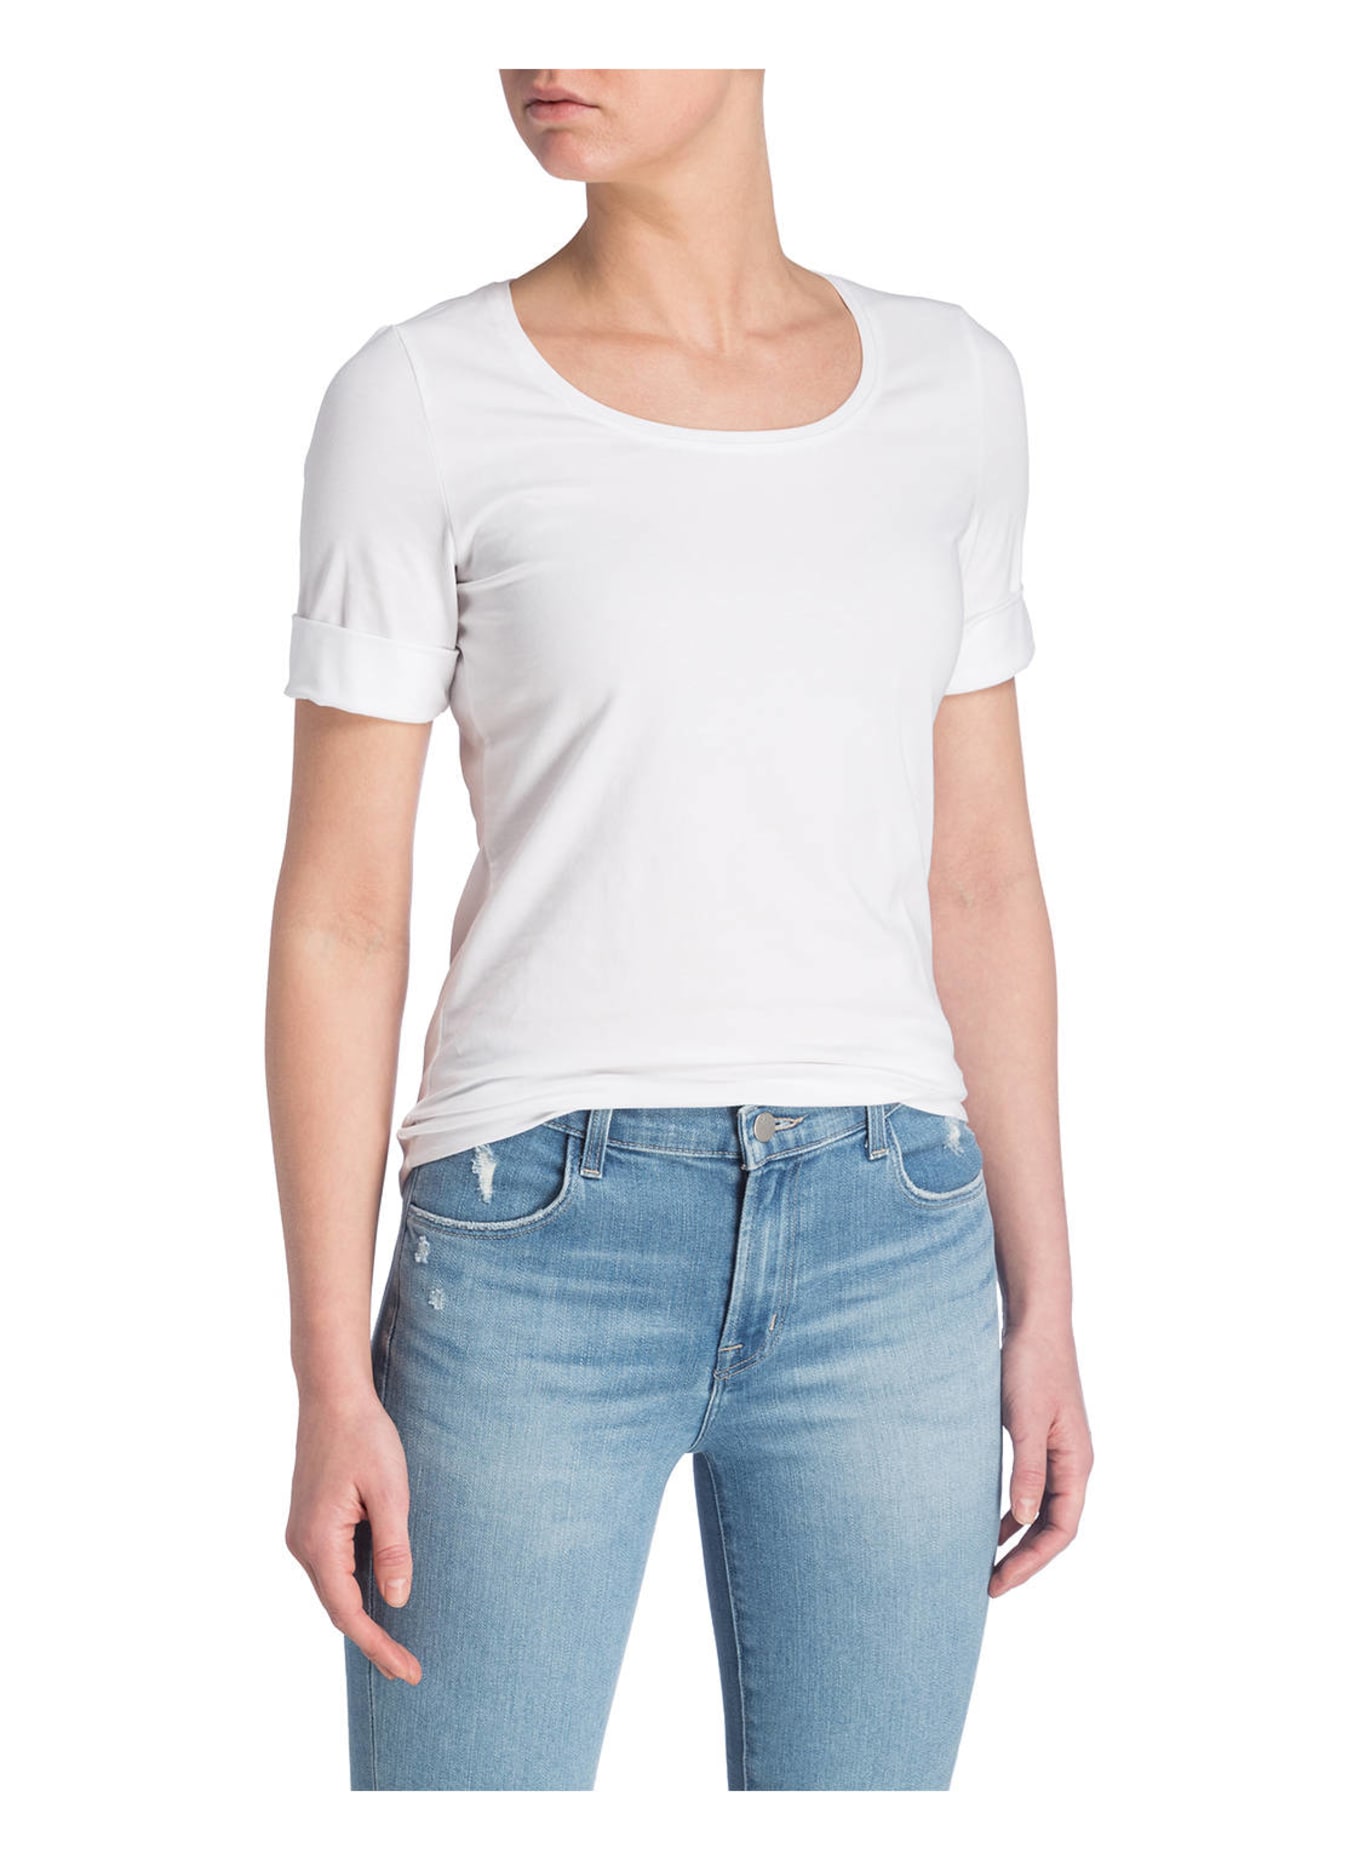 REPEAT T-shirt, Color: WHITE (Image 2)